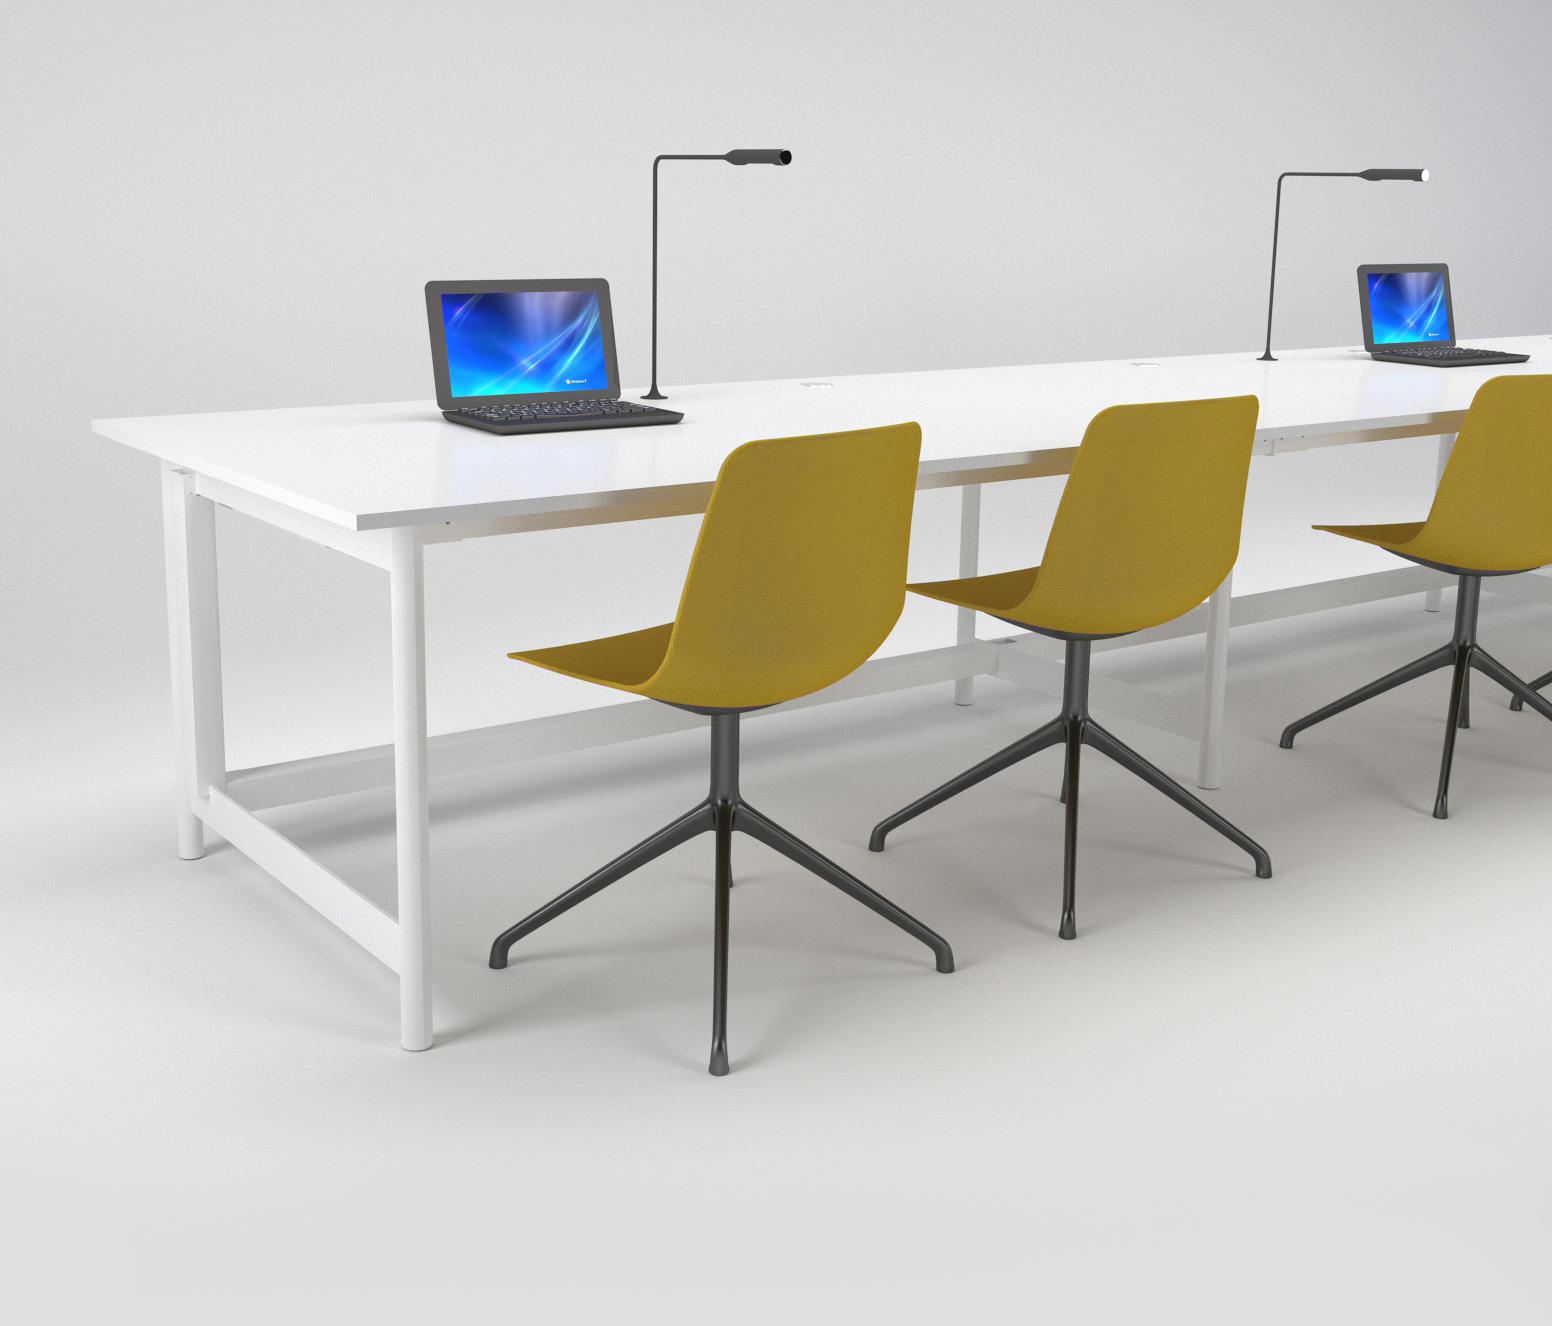 Bench Factory Contract Tables From Idm Coupechoux Architonic